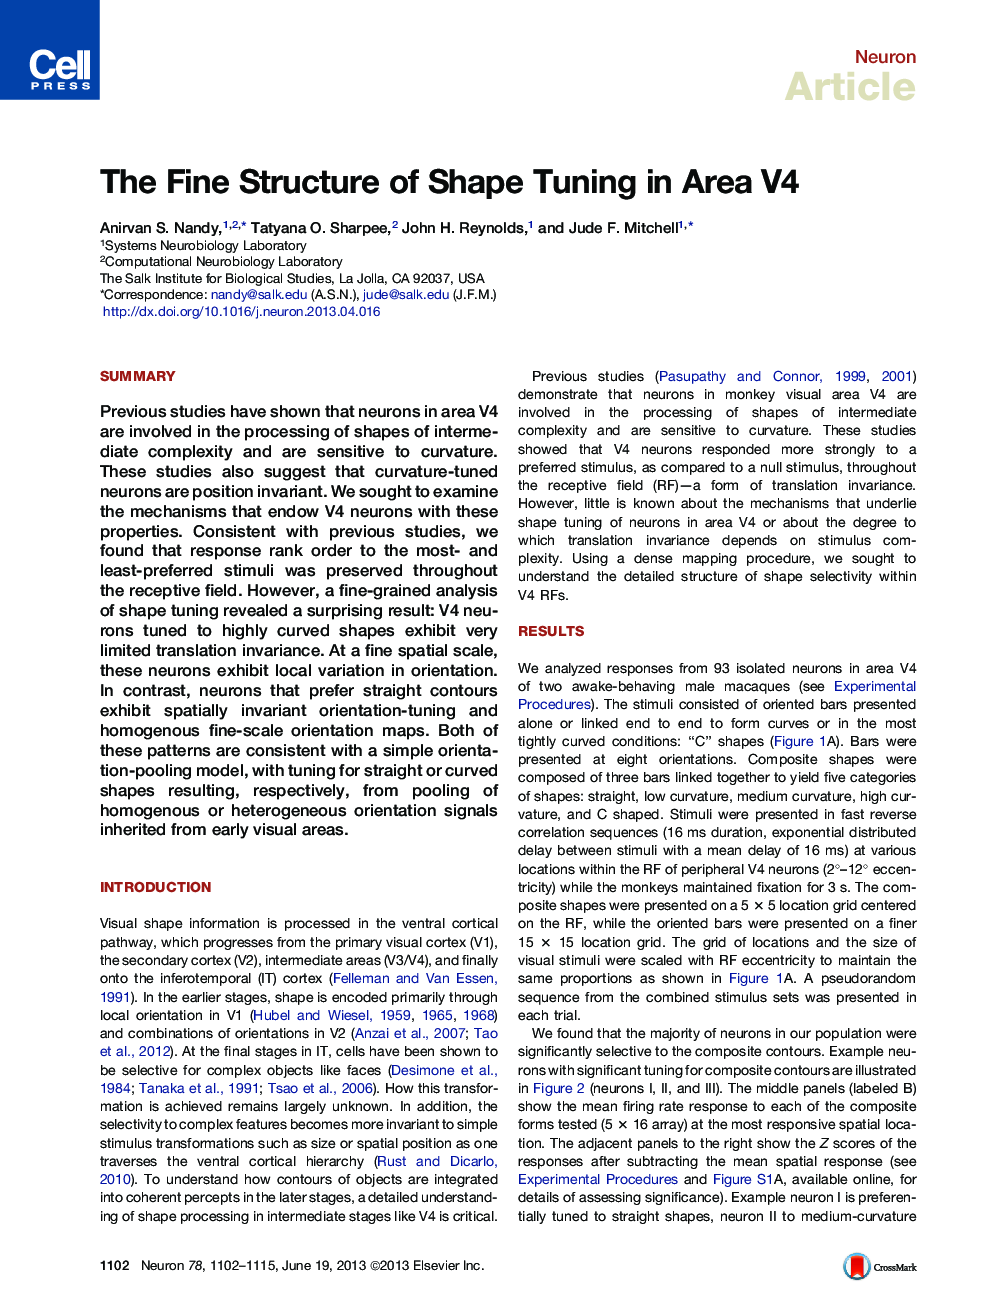 The Fine Structure of Shape Tuning in Area V4